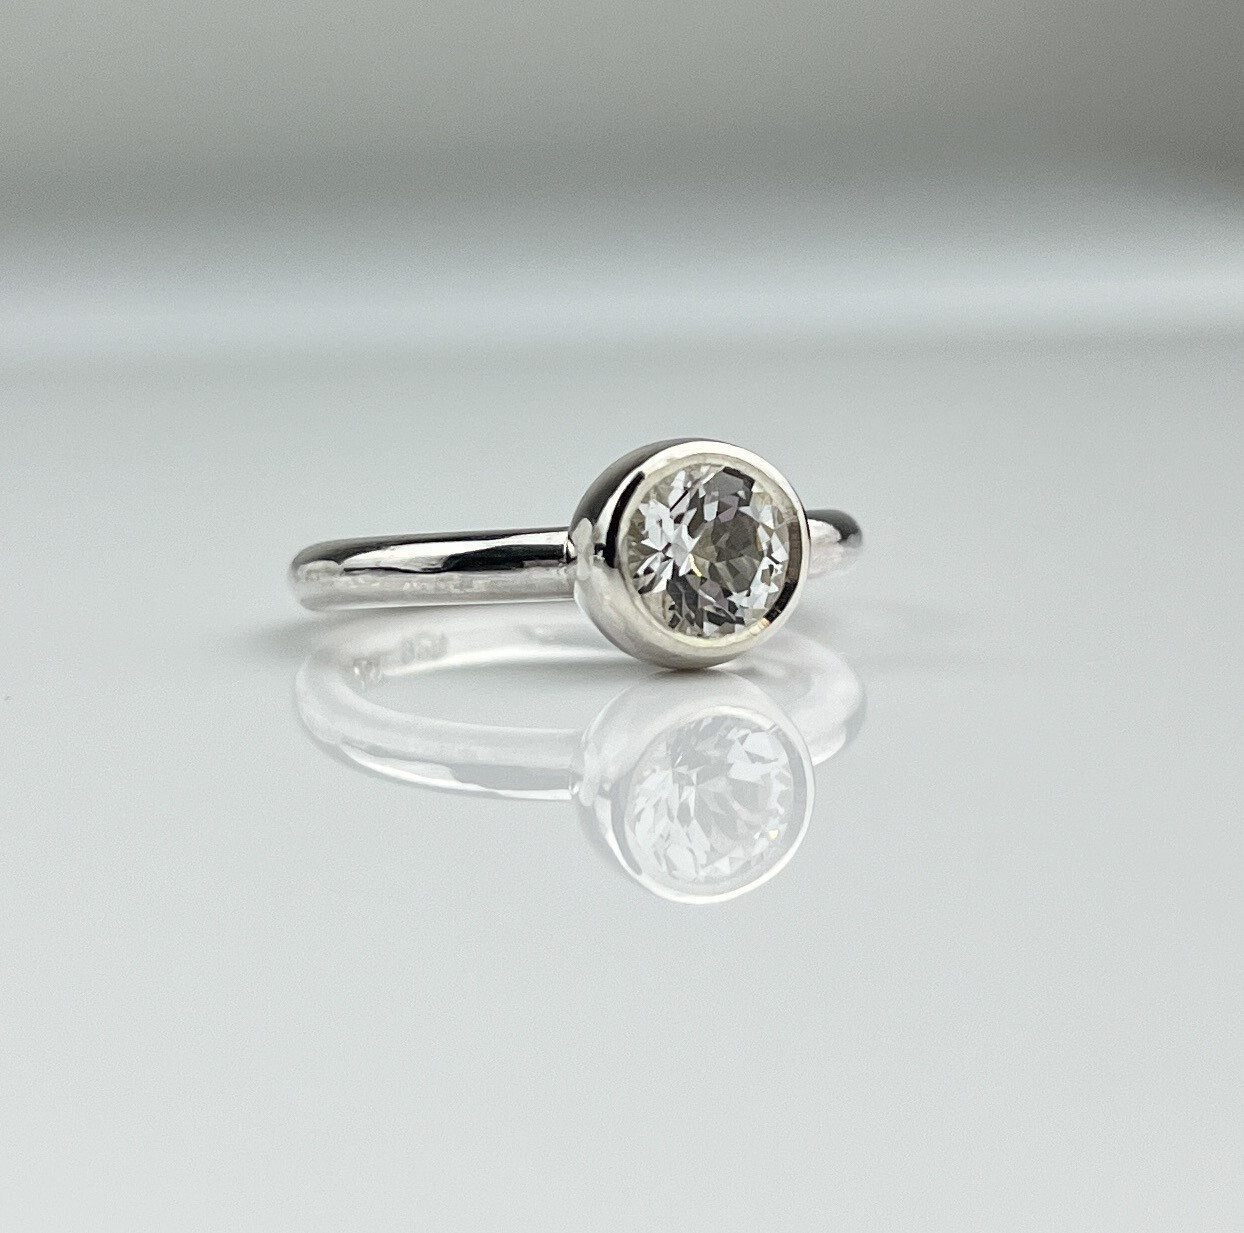 Large White Topaz Ring Size 5.75 Sterling Silver